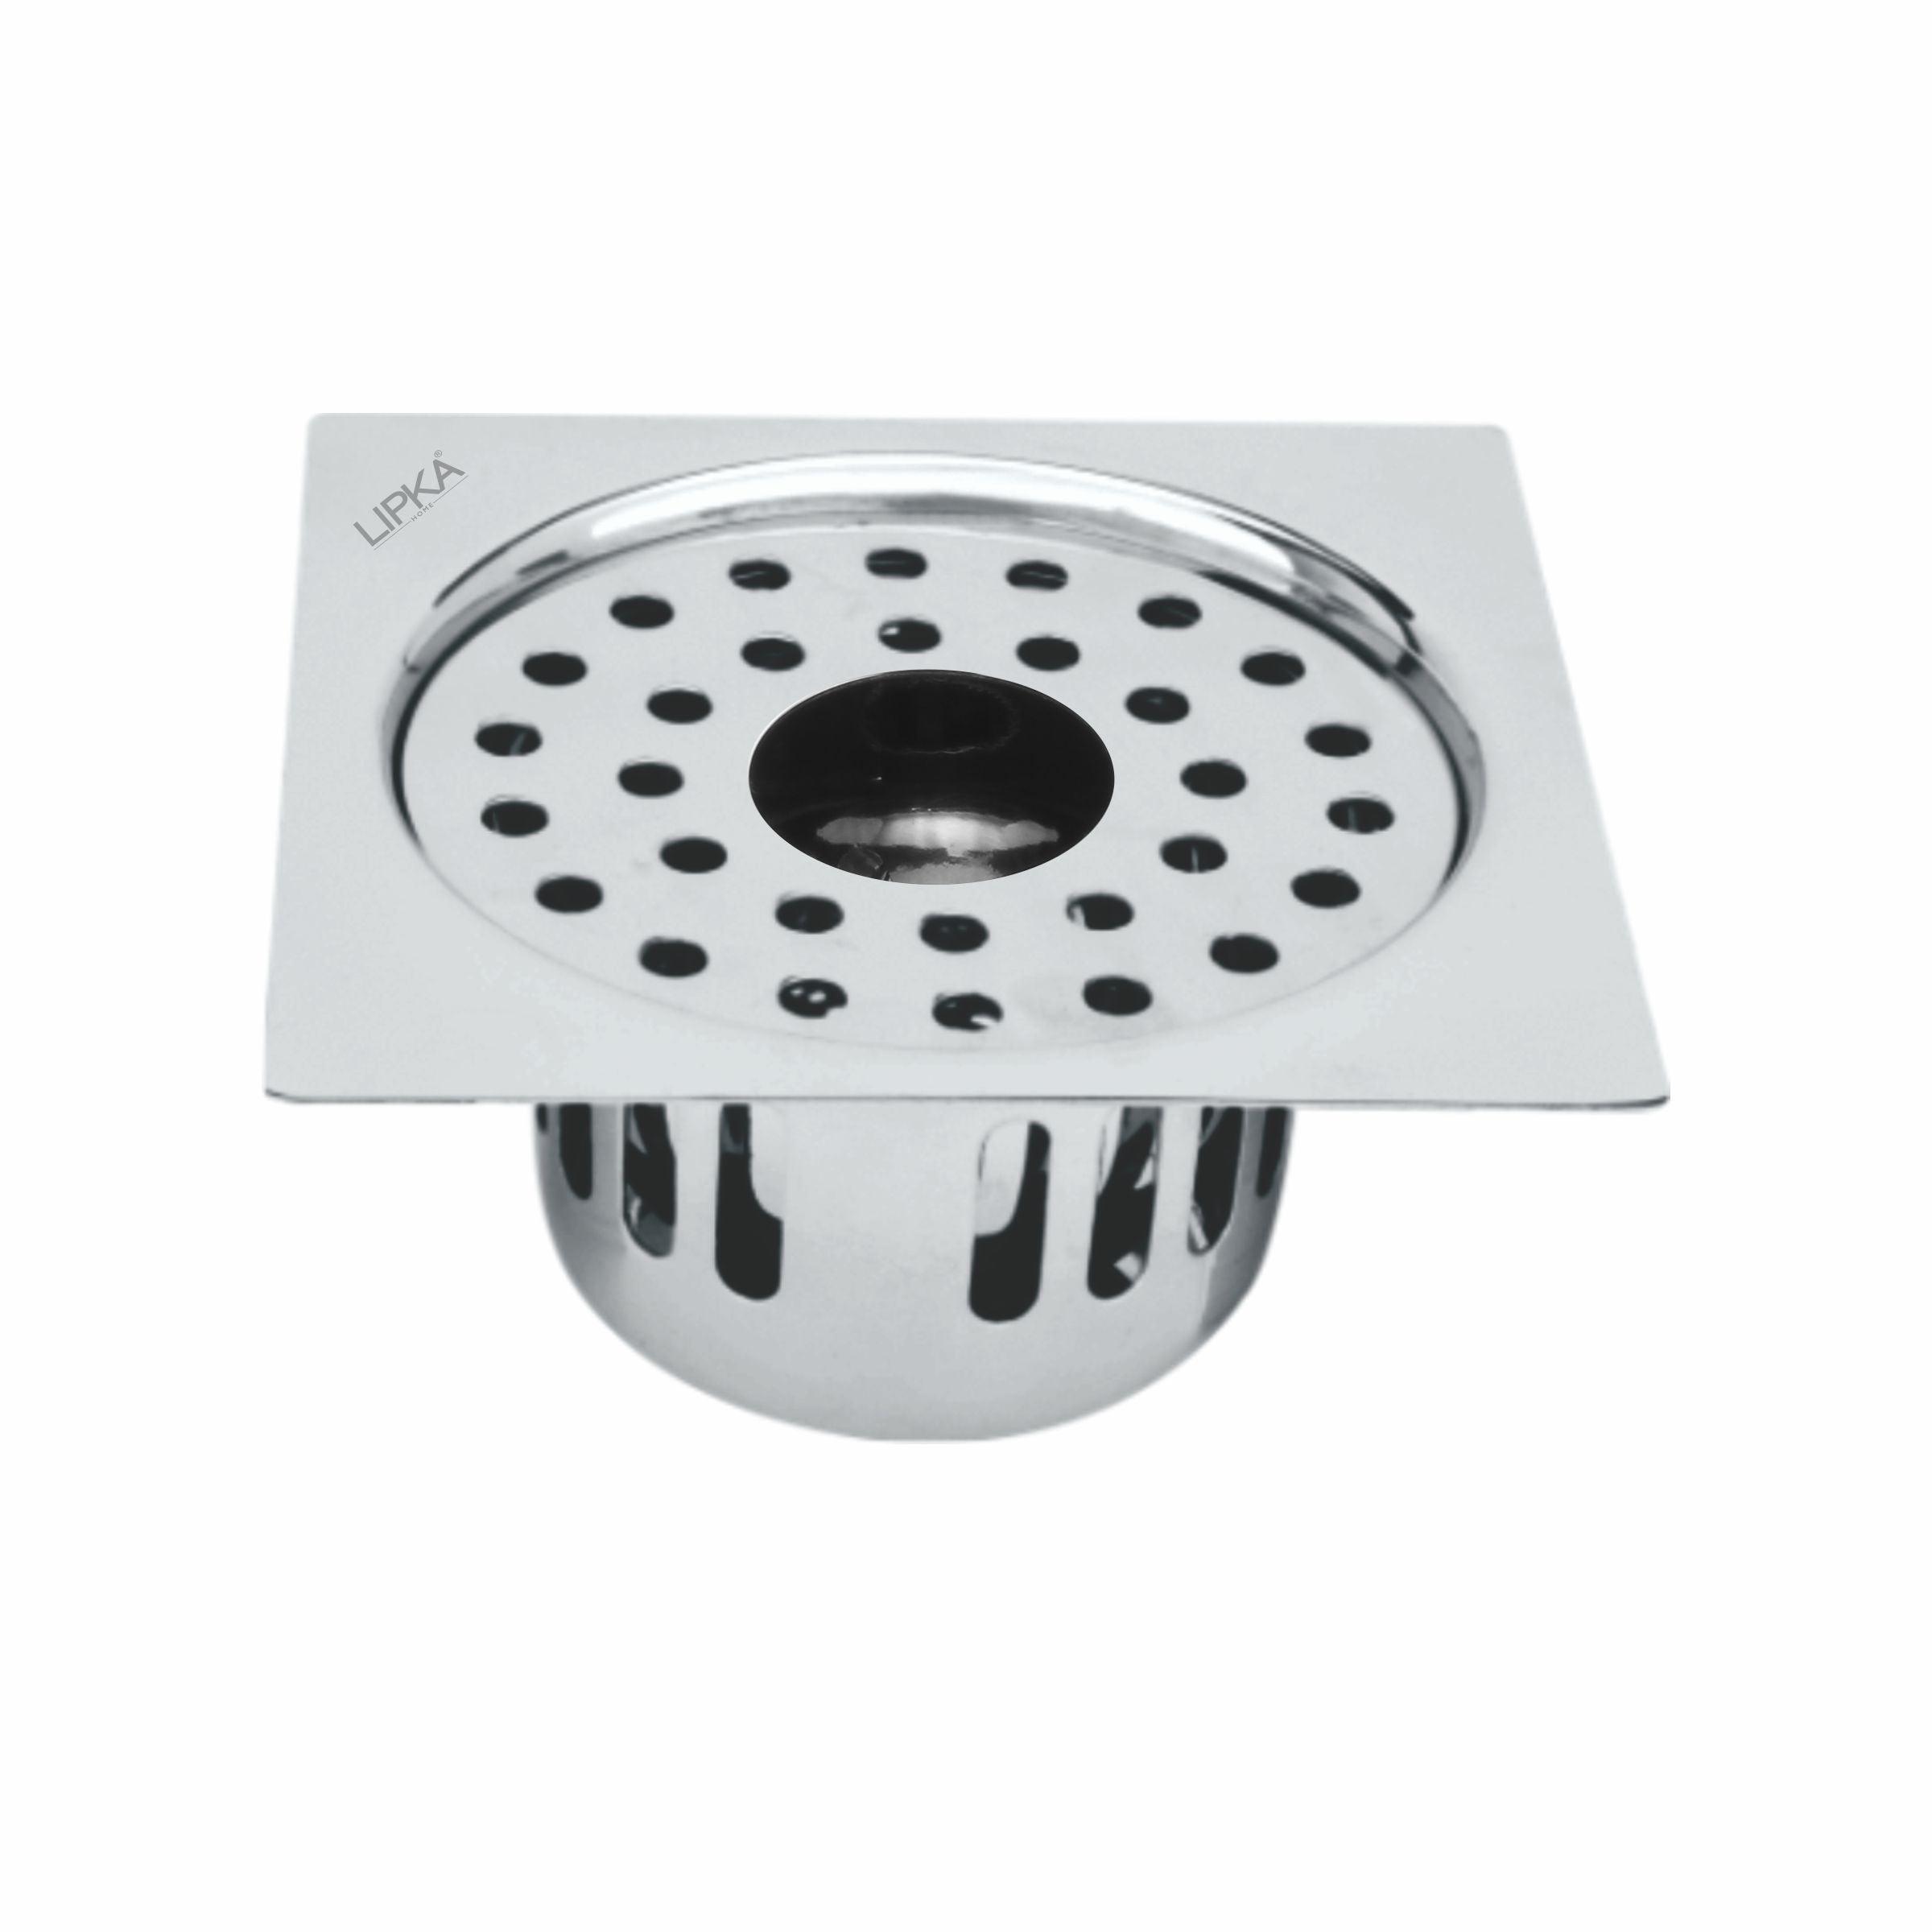 Square Flat Cut Floor Drain (6 x 6 Inches) with Hole and Cockroach Trap - LIPKA - Lipka Home